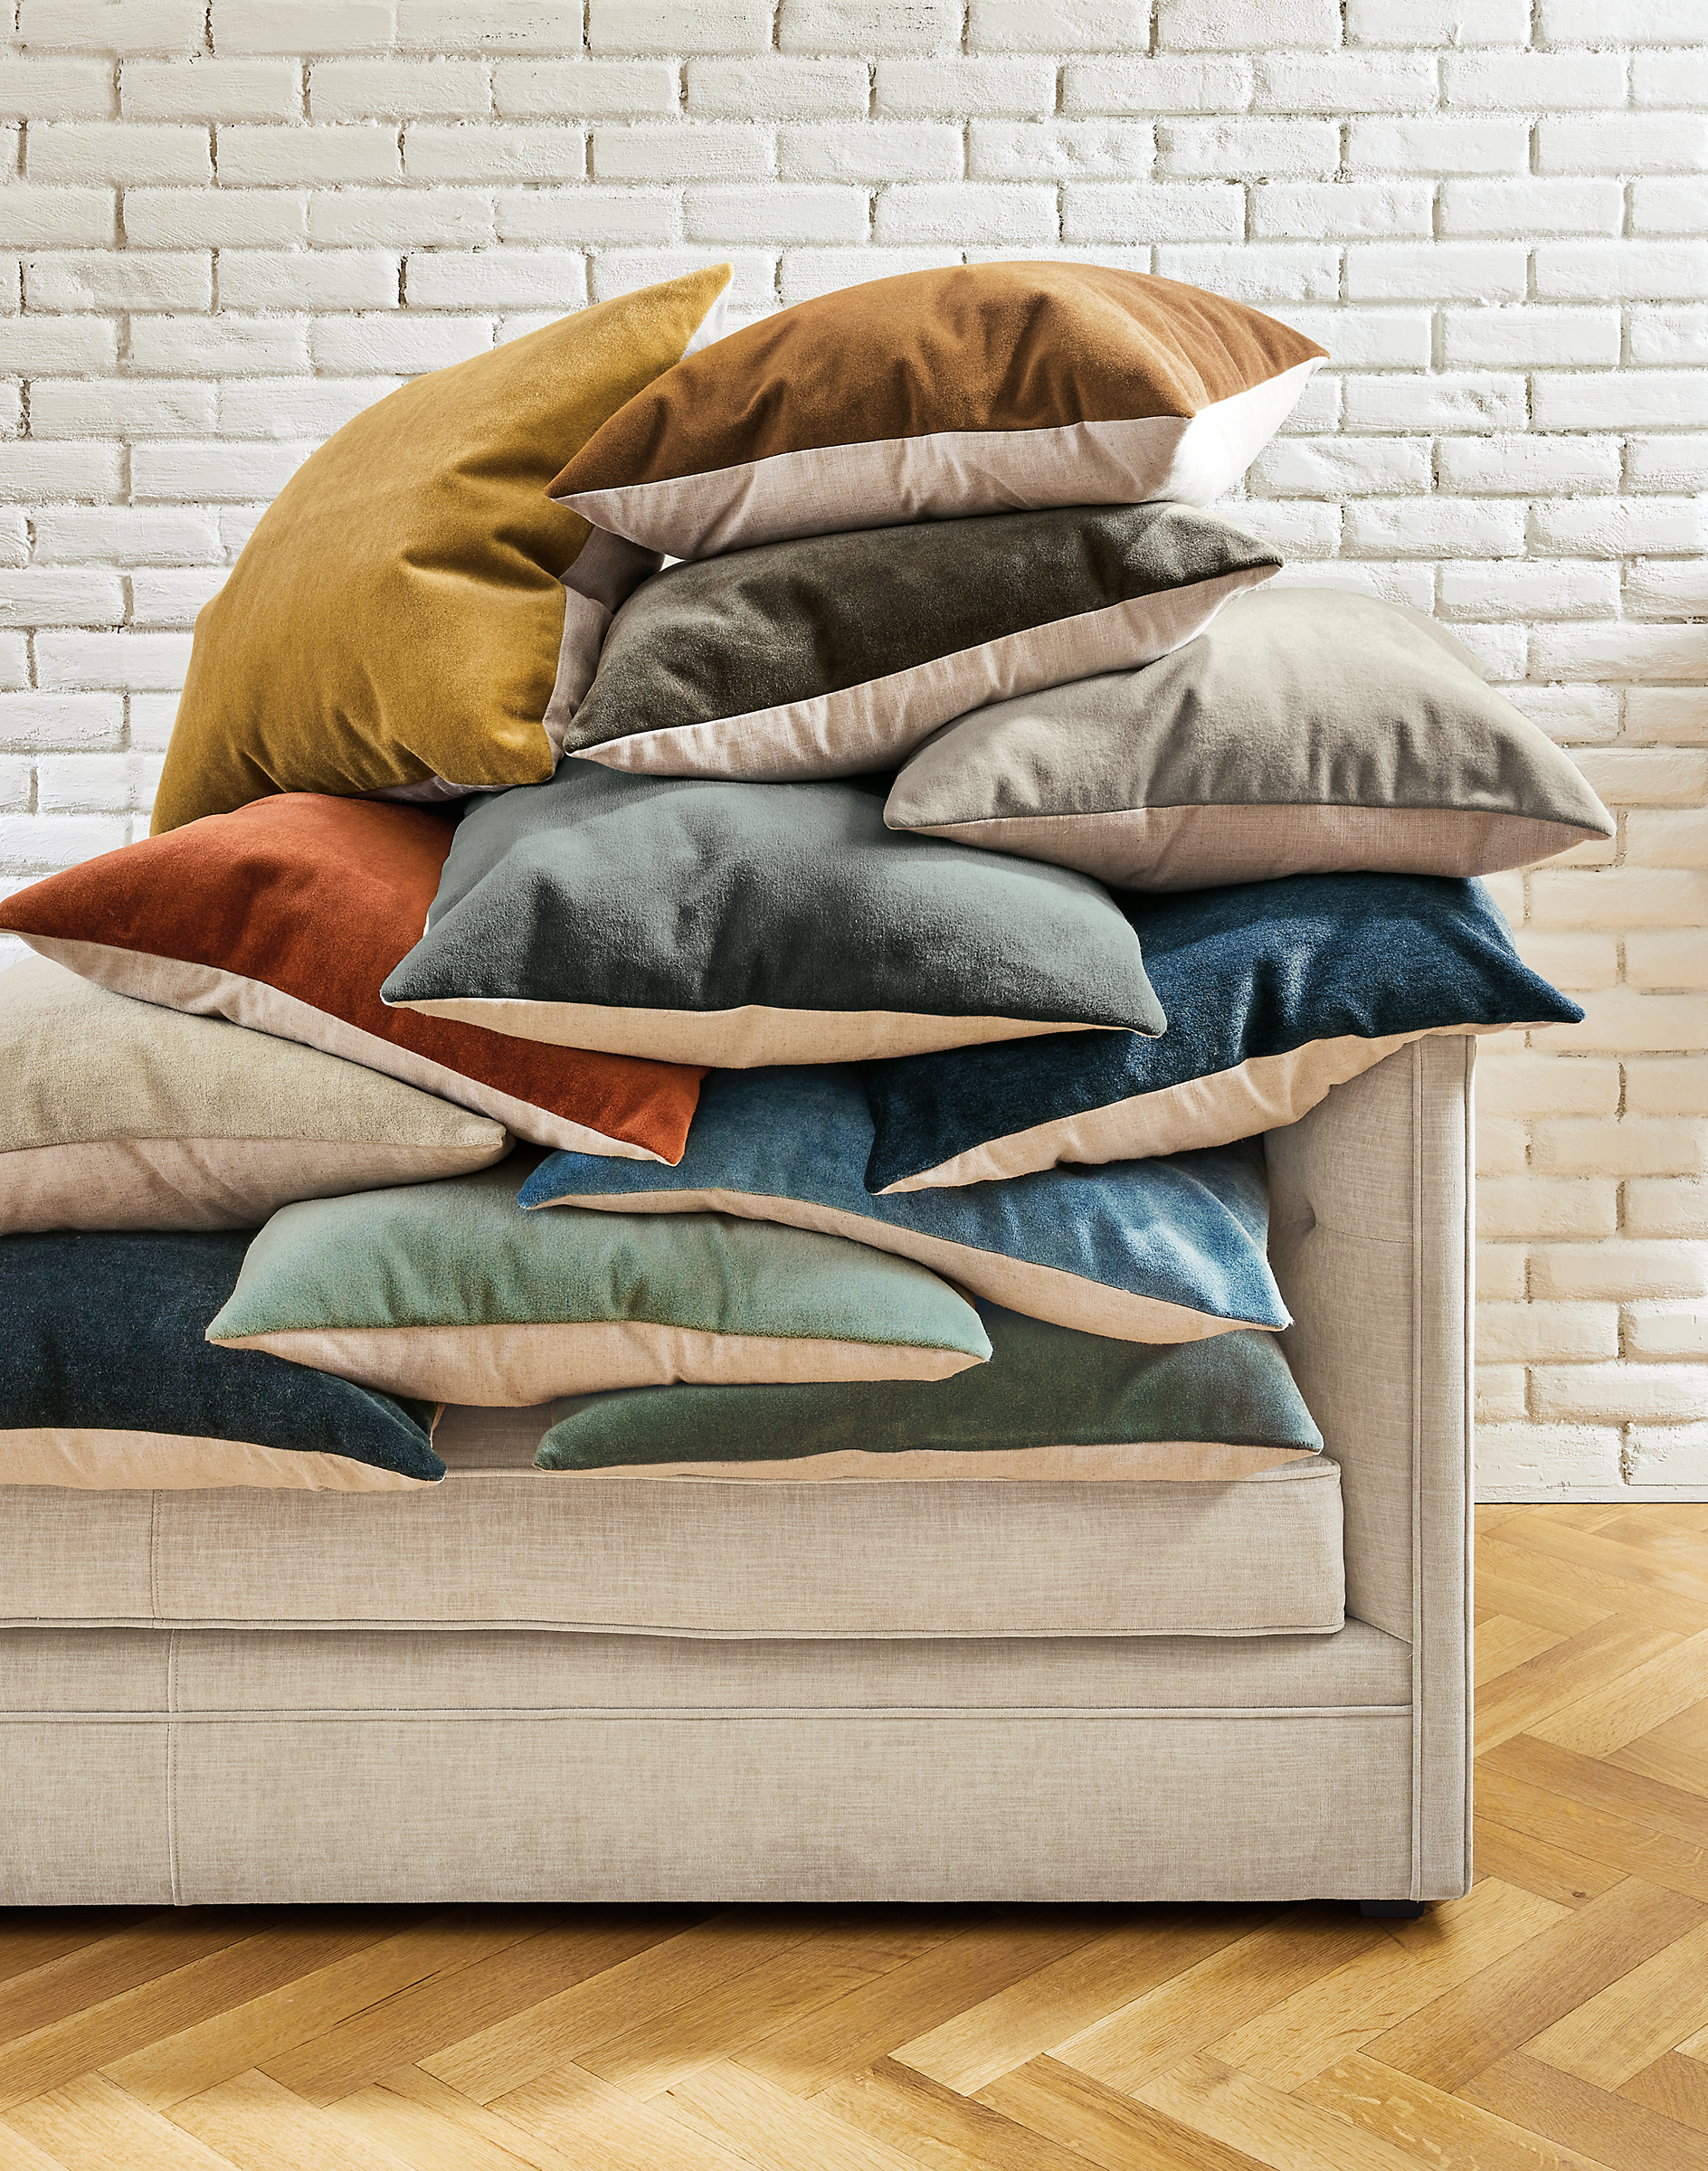 a delightfully messy pile of wool velvet pillows of various colors stacked on a macalester sofa.